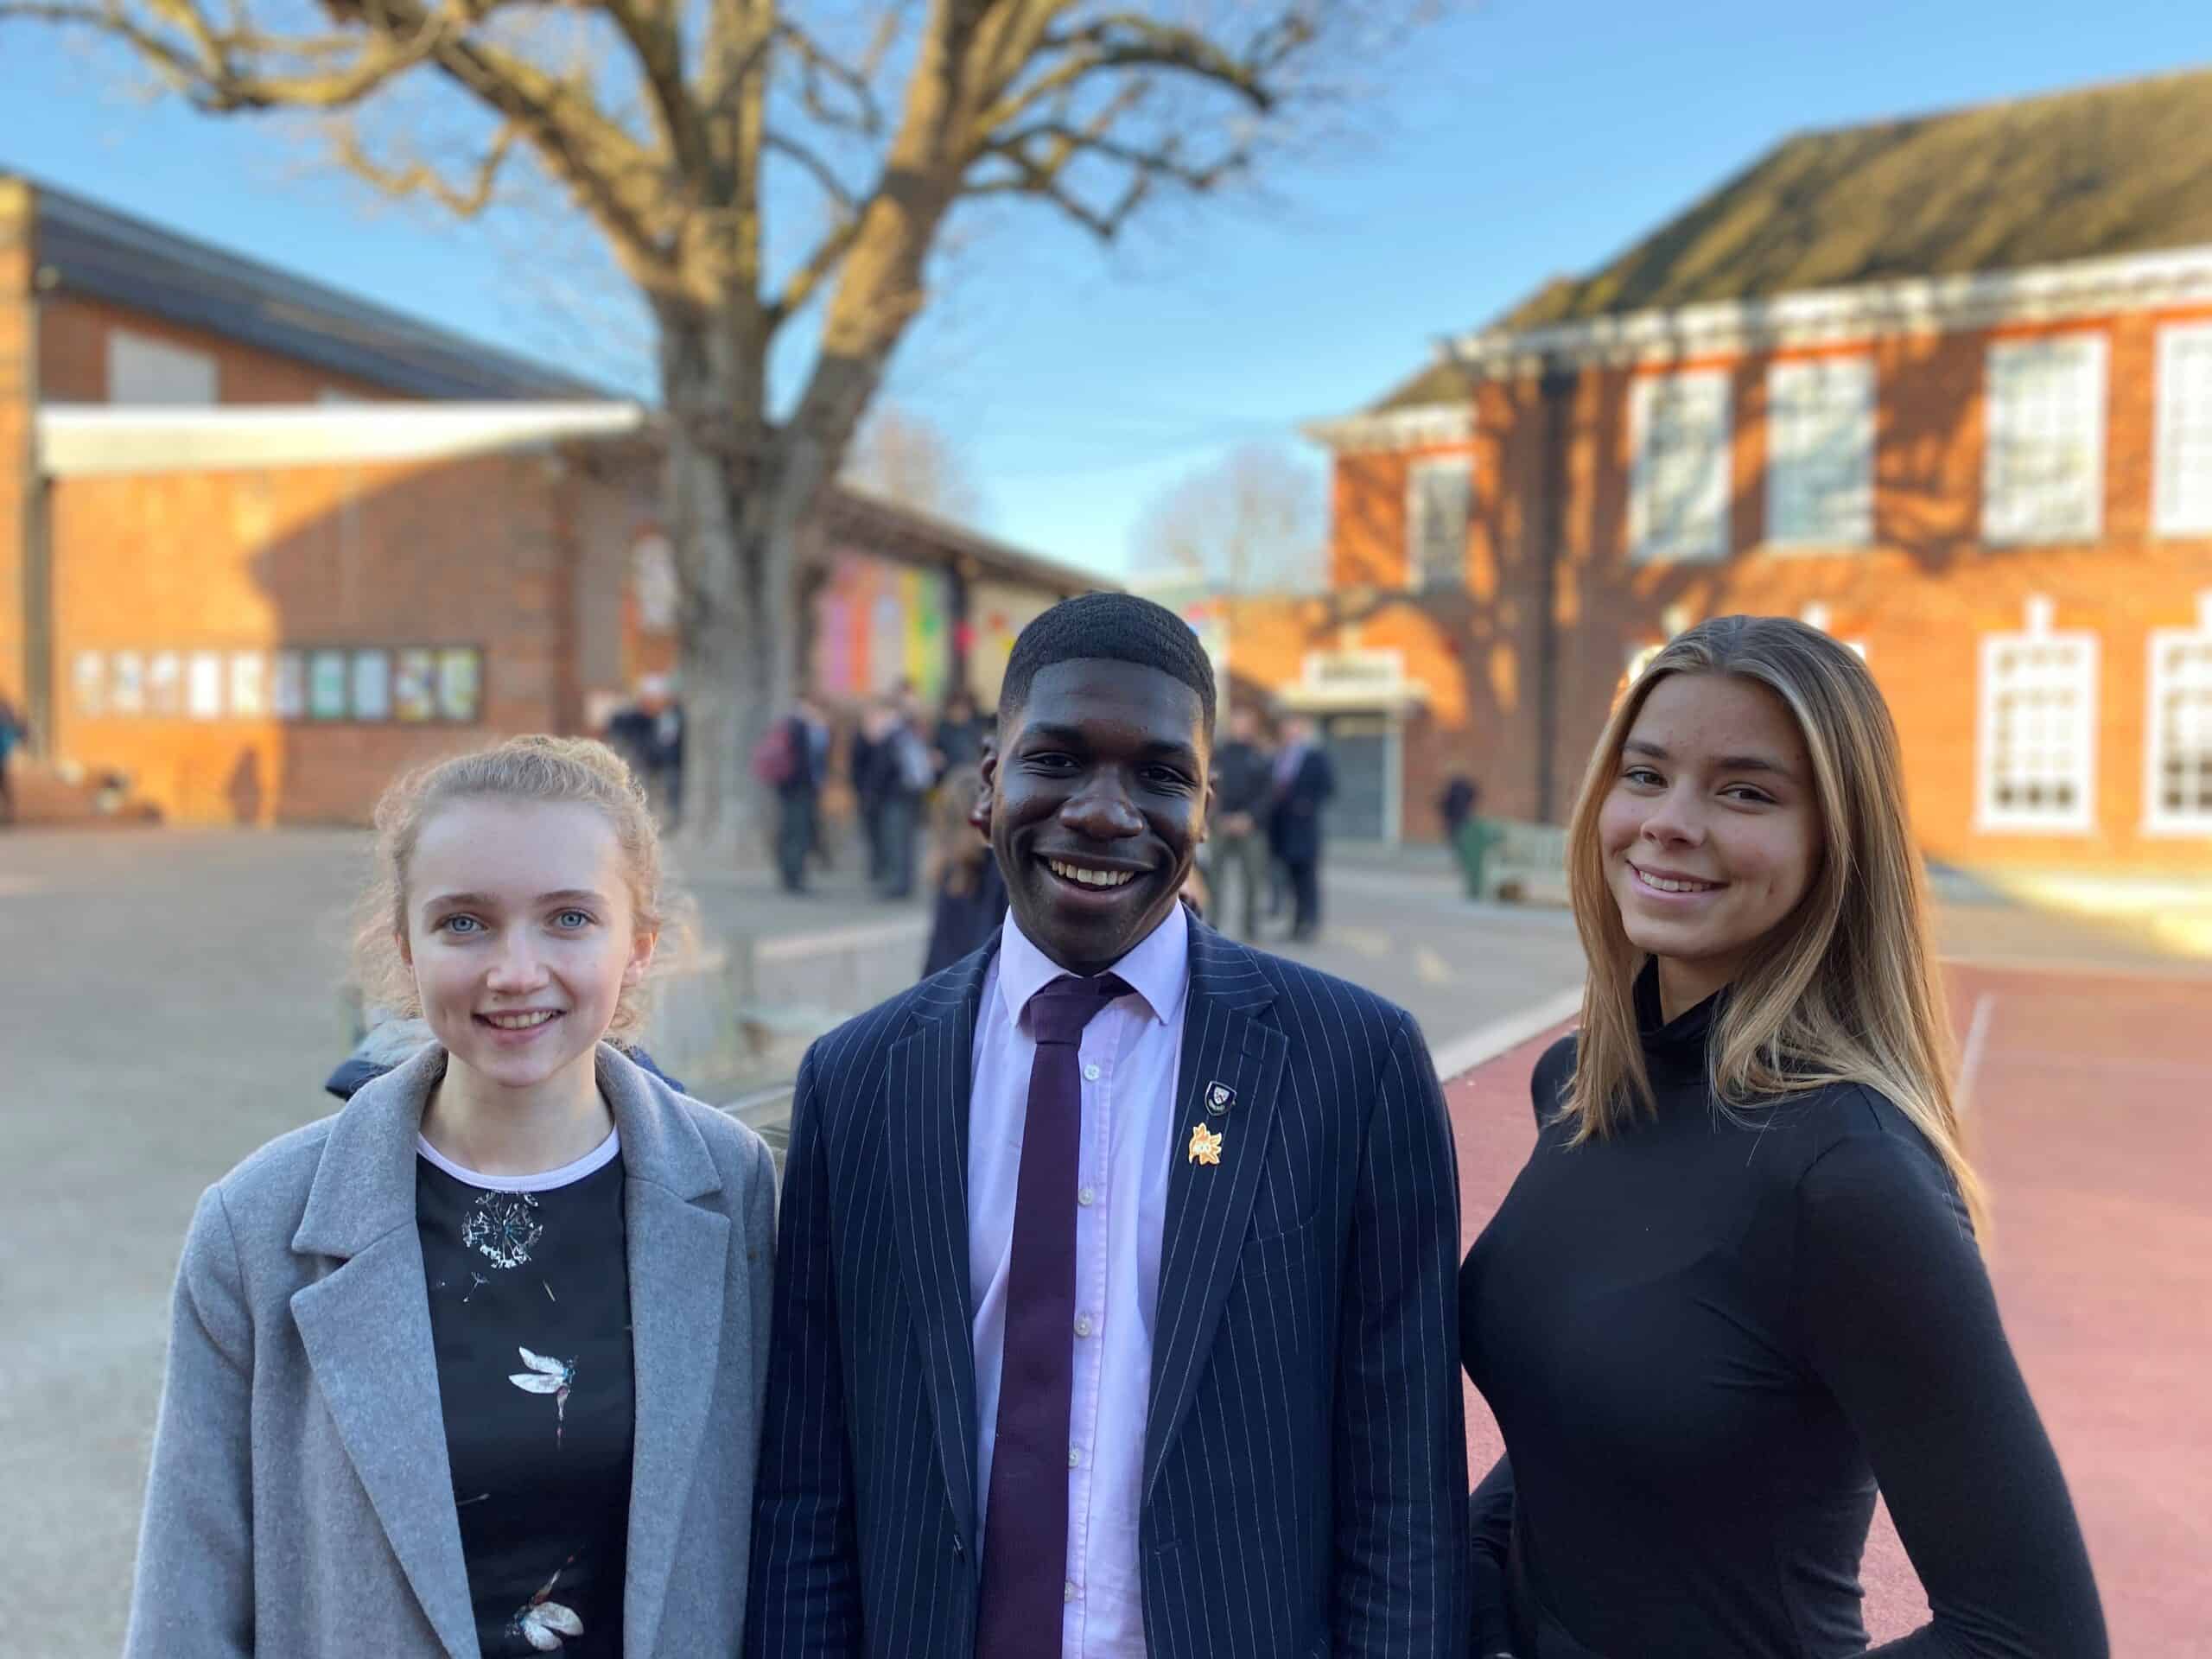 From left to right: Elena, Ore and Romy. Ore was School Captain for the 19/20 school year with Elena and Romy as his vice-captains. Elena goes on to study Medicine, Ore to study Dental Surgery/Oral Science, and Romy will have a gap year before taking up a degree in Natural Sciences.